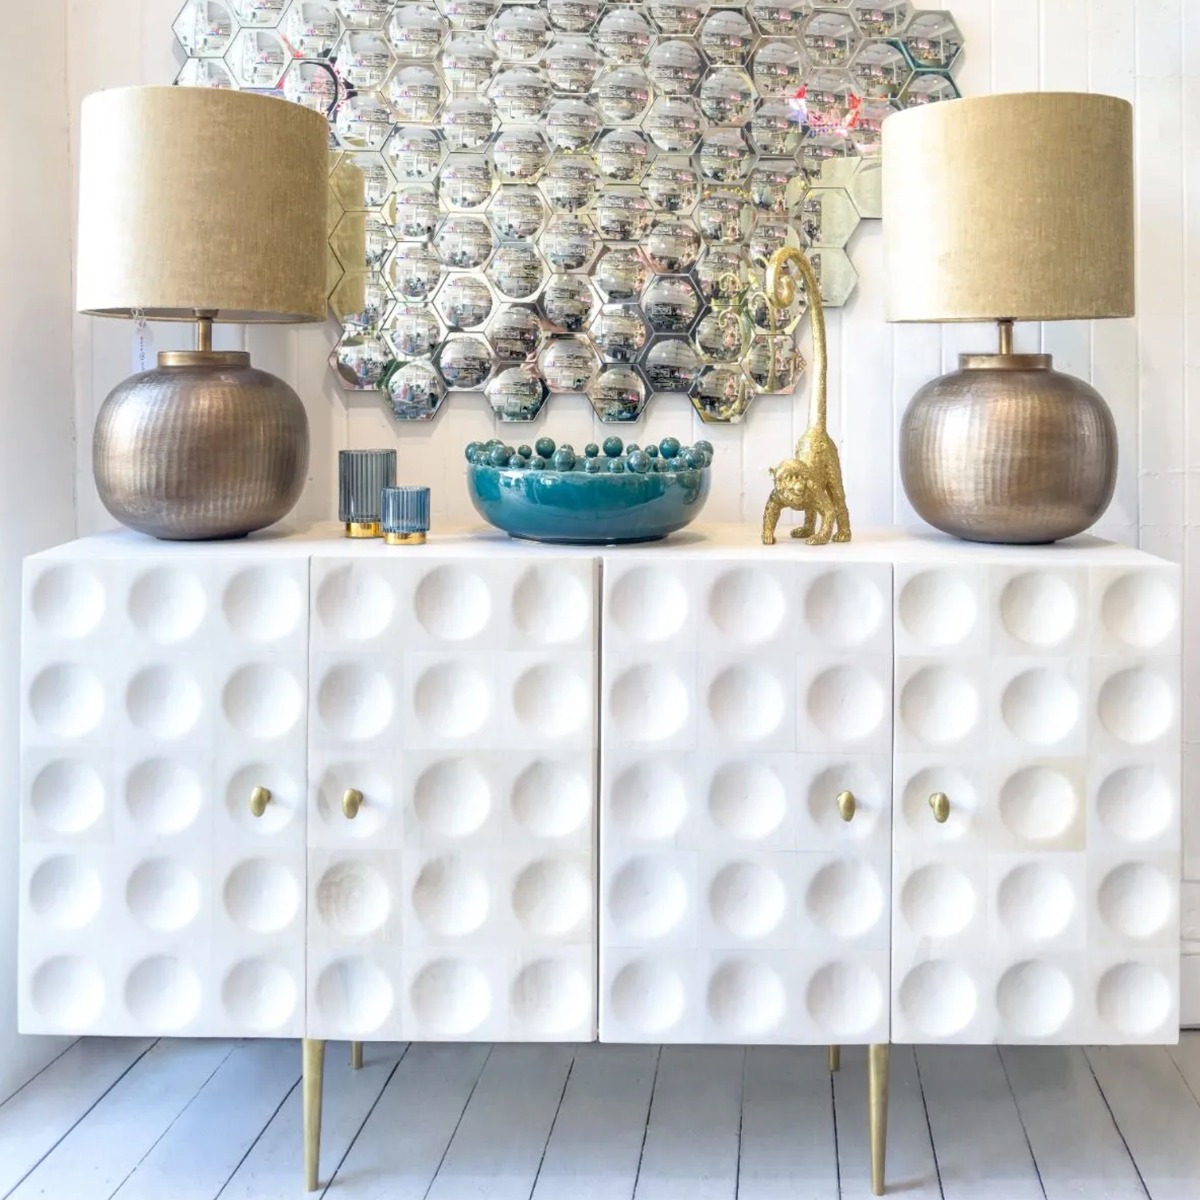 white wash dimpled mango wood sideboard with gold metal legs and handles, accessorised with a teal glossy ceramic bobble bowl and a gold decorative monkey scuplture